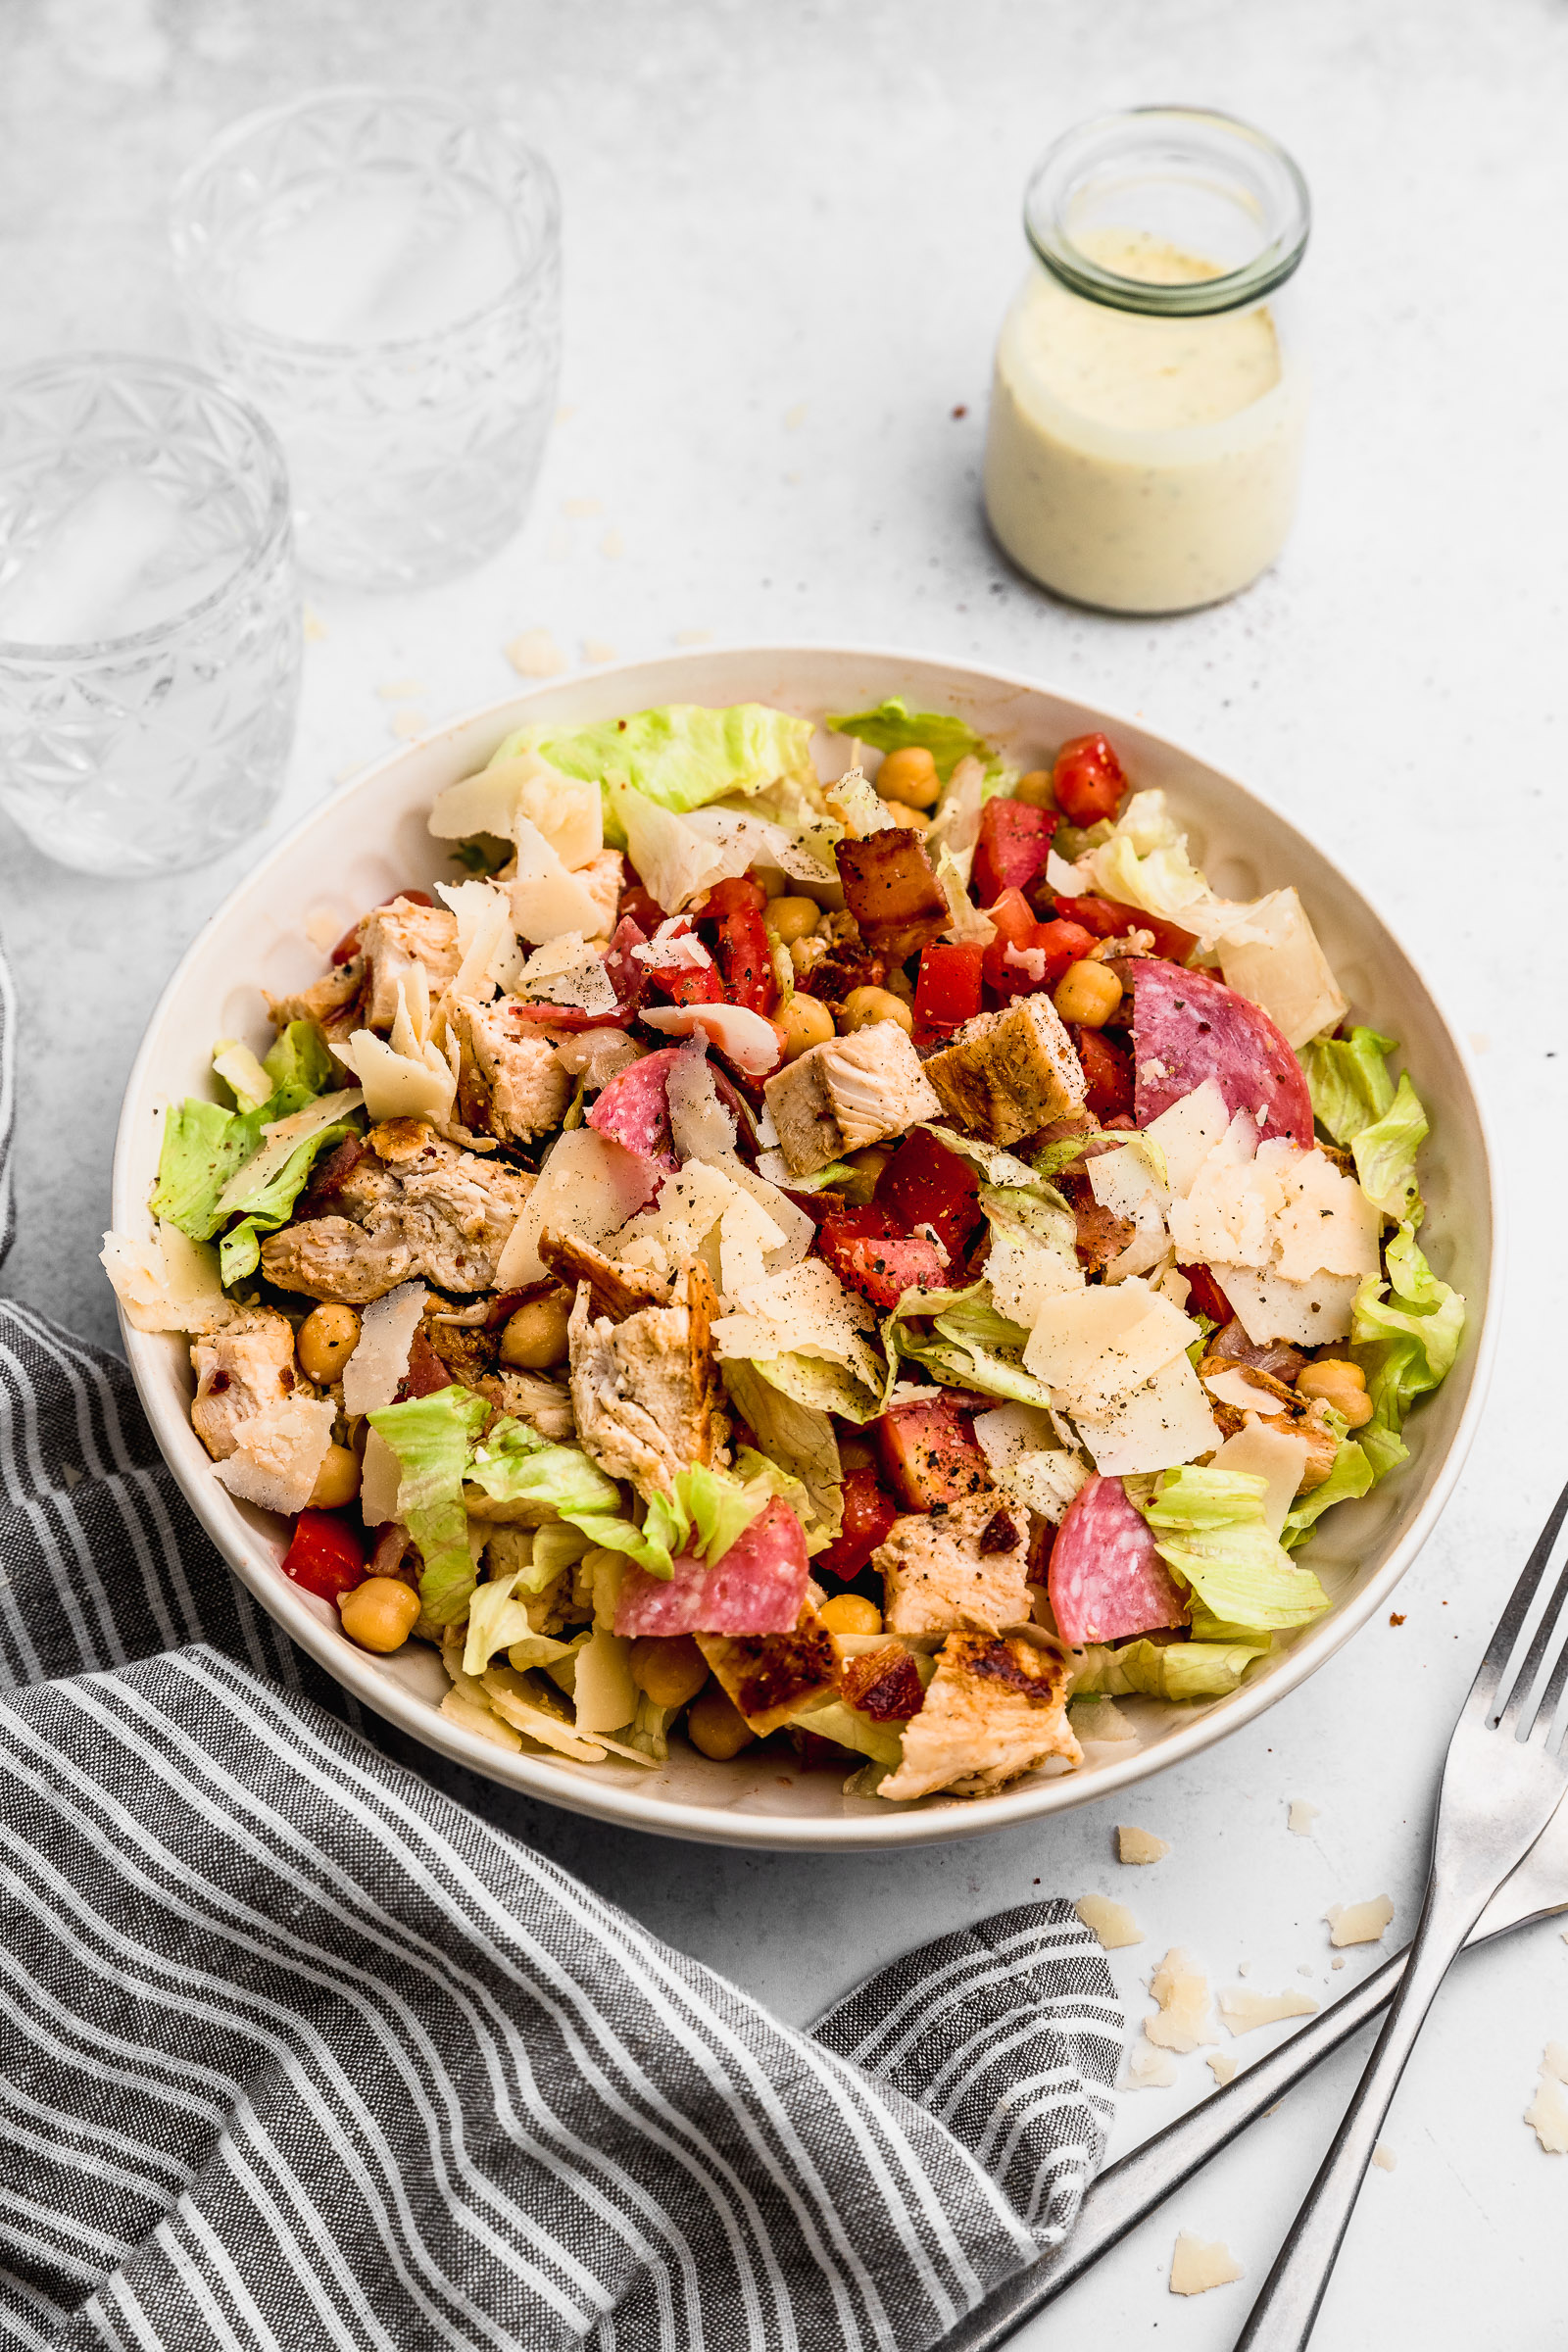 Jennifer Aniston's Salad that she ate on the set of FRIENDS. A Cobb salad with lettuce, chickpeas, tomatoes, salami, chicken, bacon, and pecorino cheese. Italian dressing in a jar on the side.